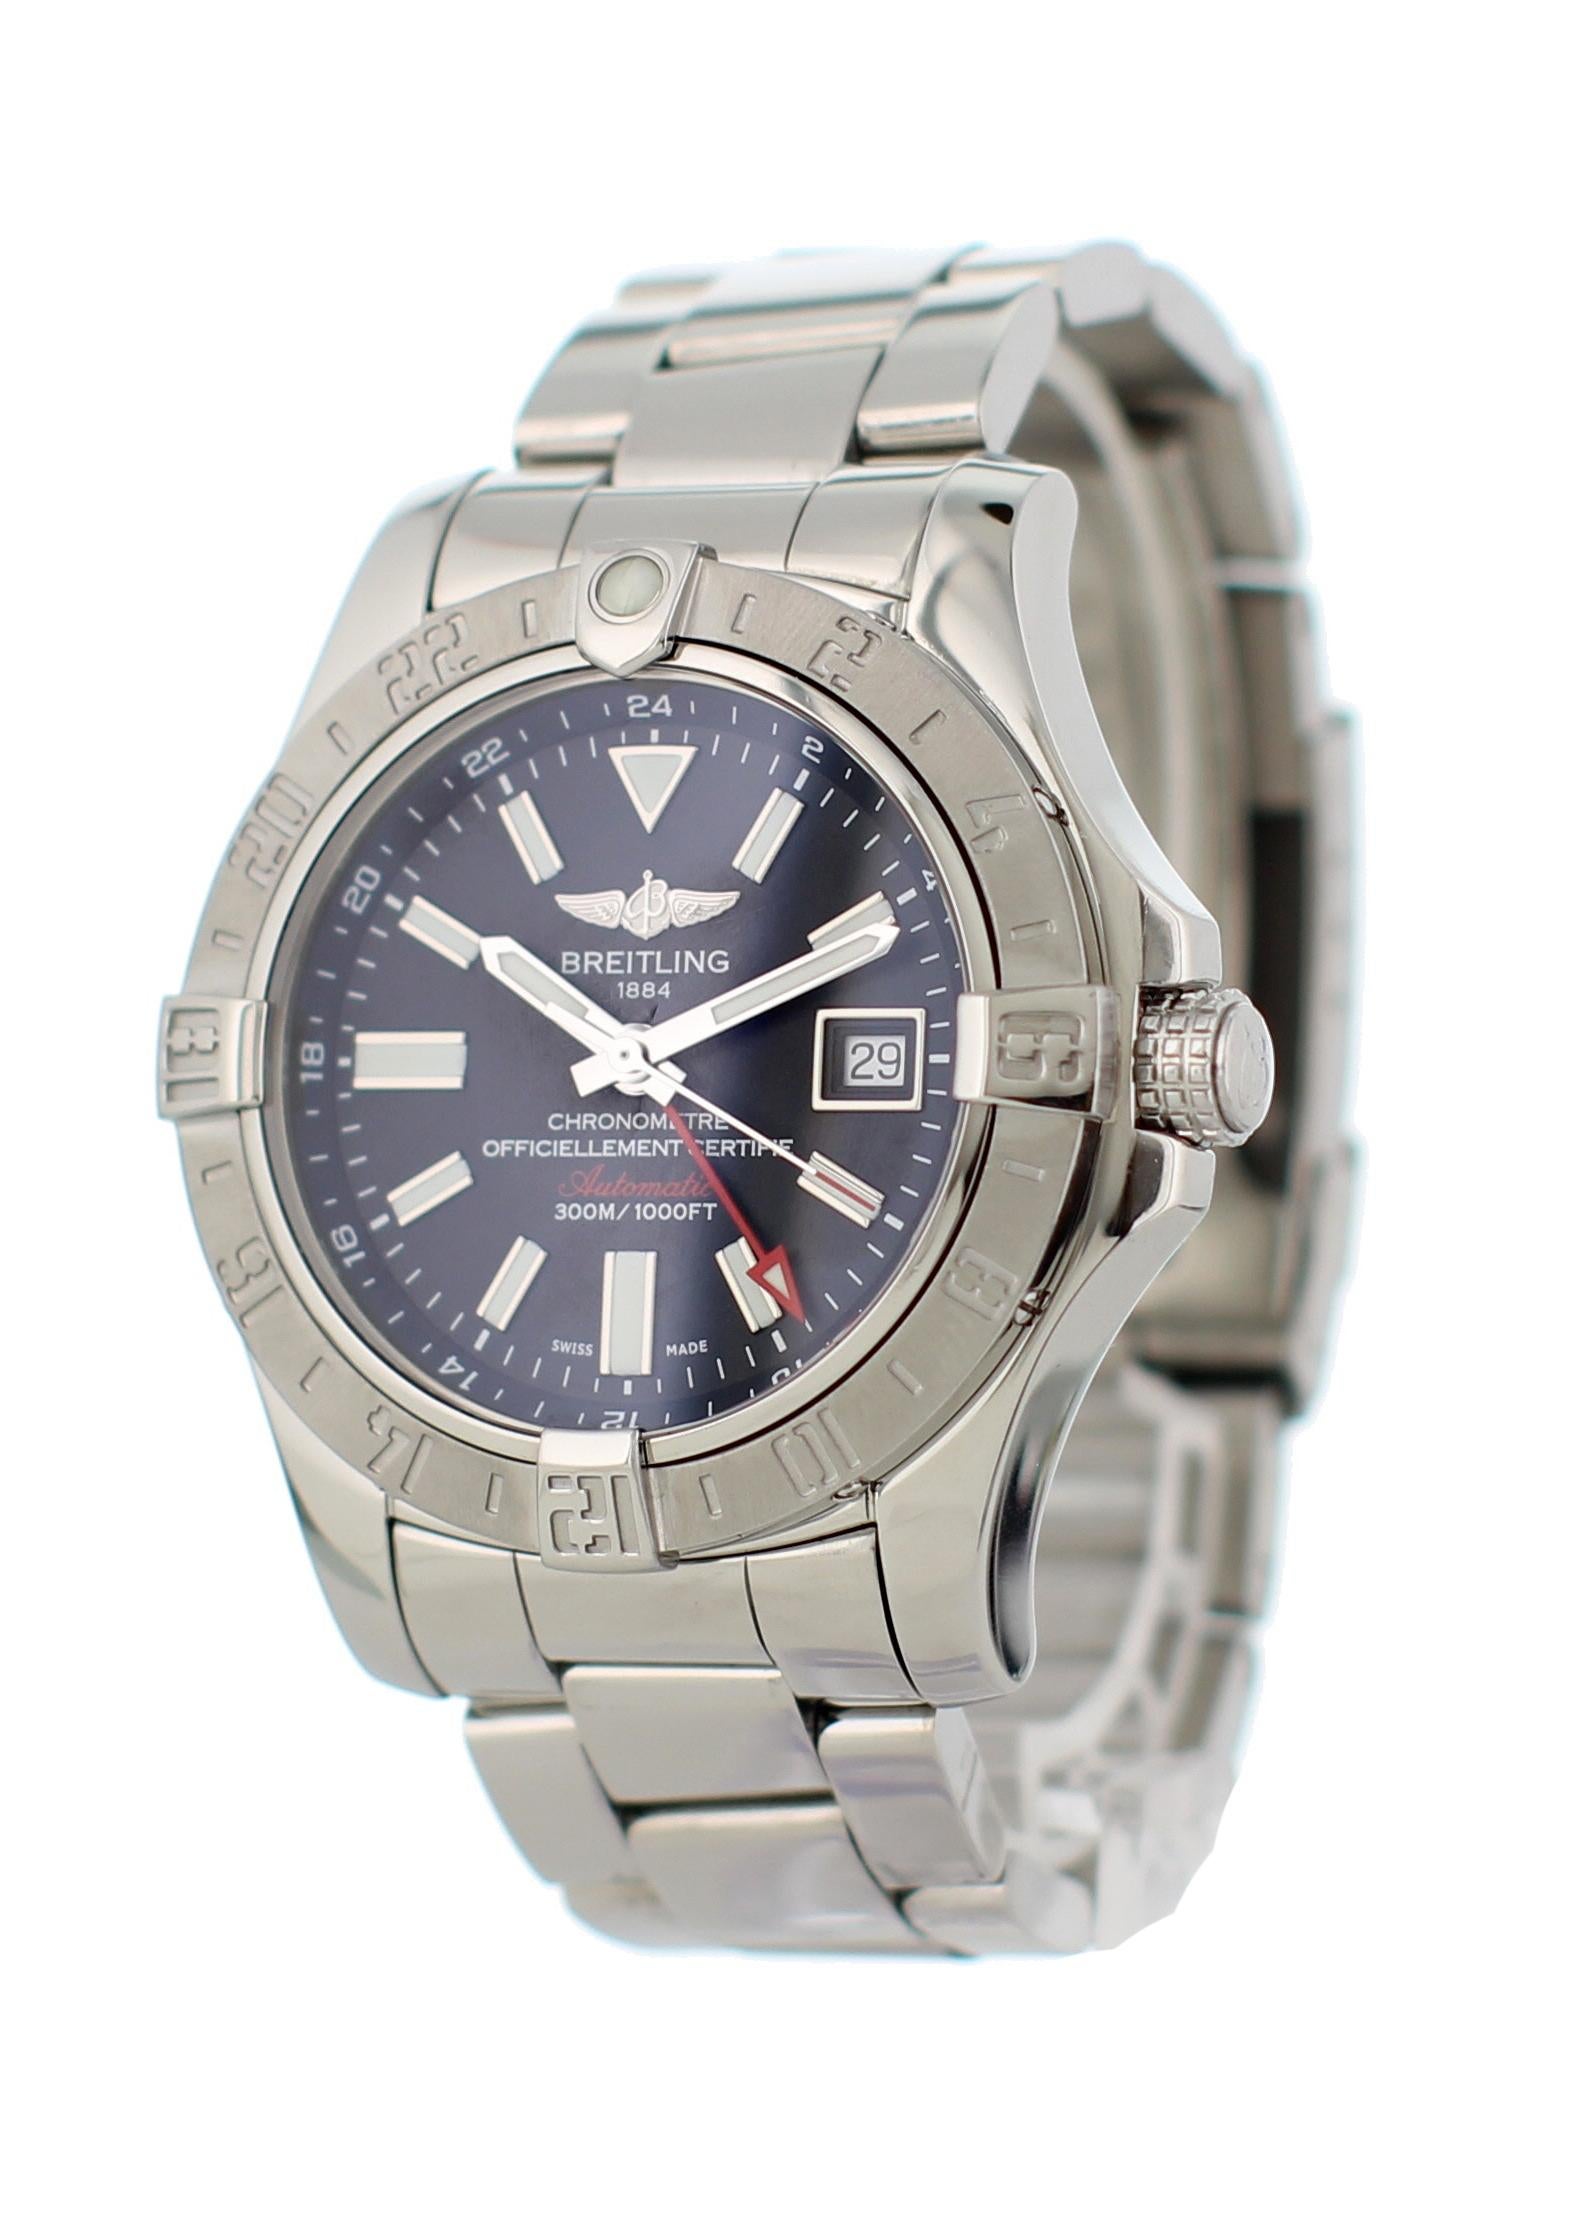 Breitling Avenger II GMT A32390 Mens Watch. 44 mm Stainless steel case. Stainless steel bidirectional GMT bezel. Black dial with luminous silver-tone hands and index hour markers. Minute markers around the outer rim. Date display at 3 o'clock.